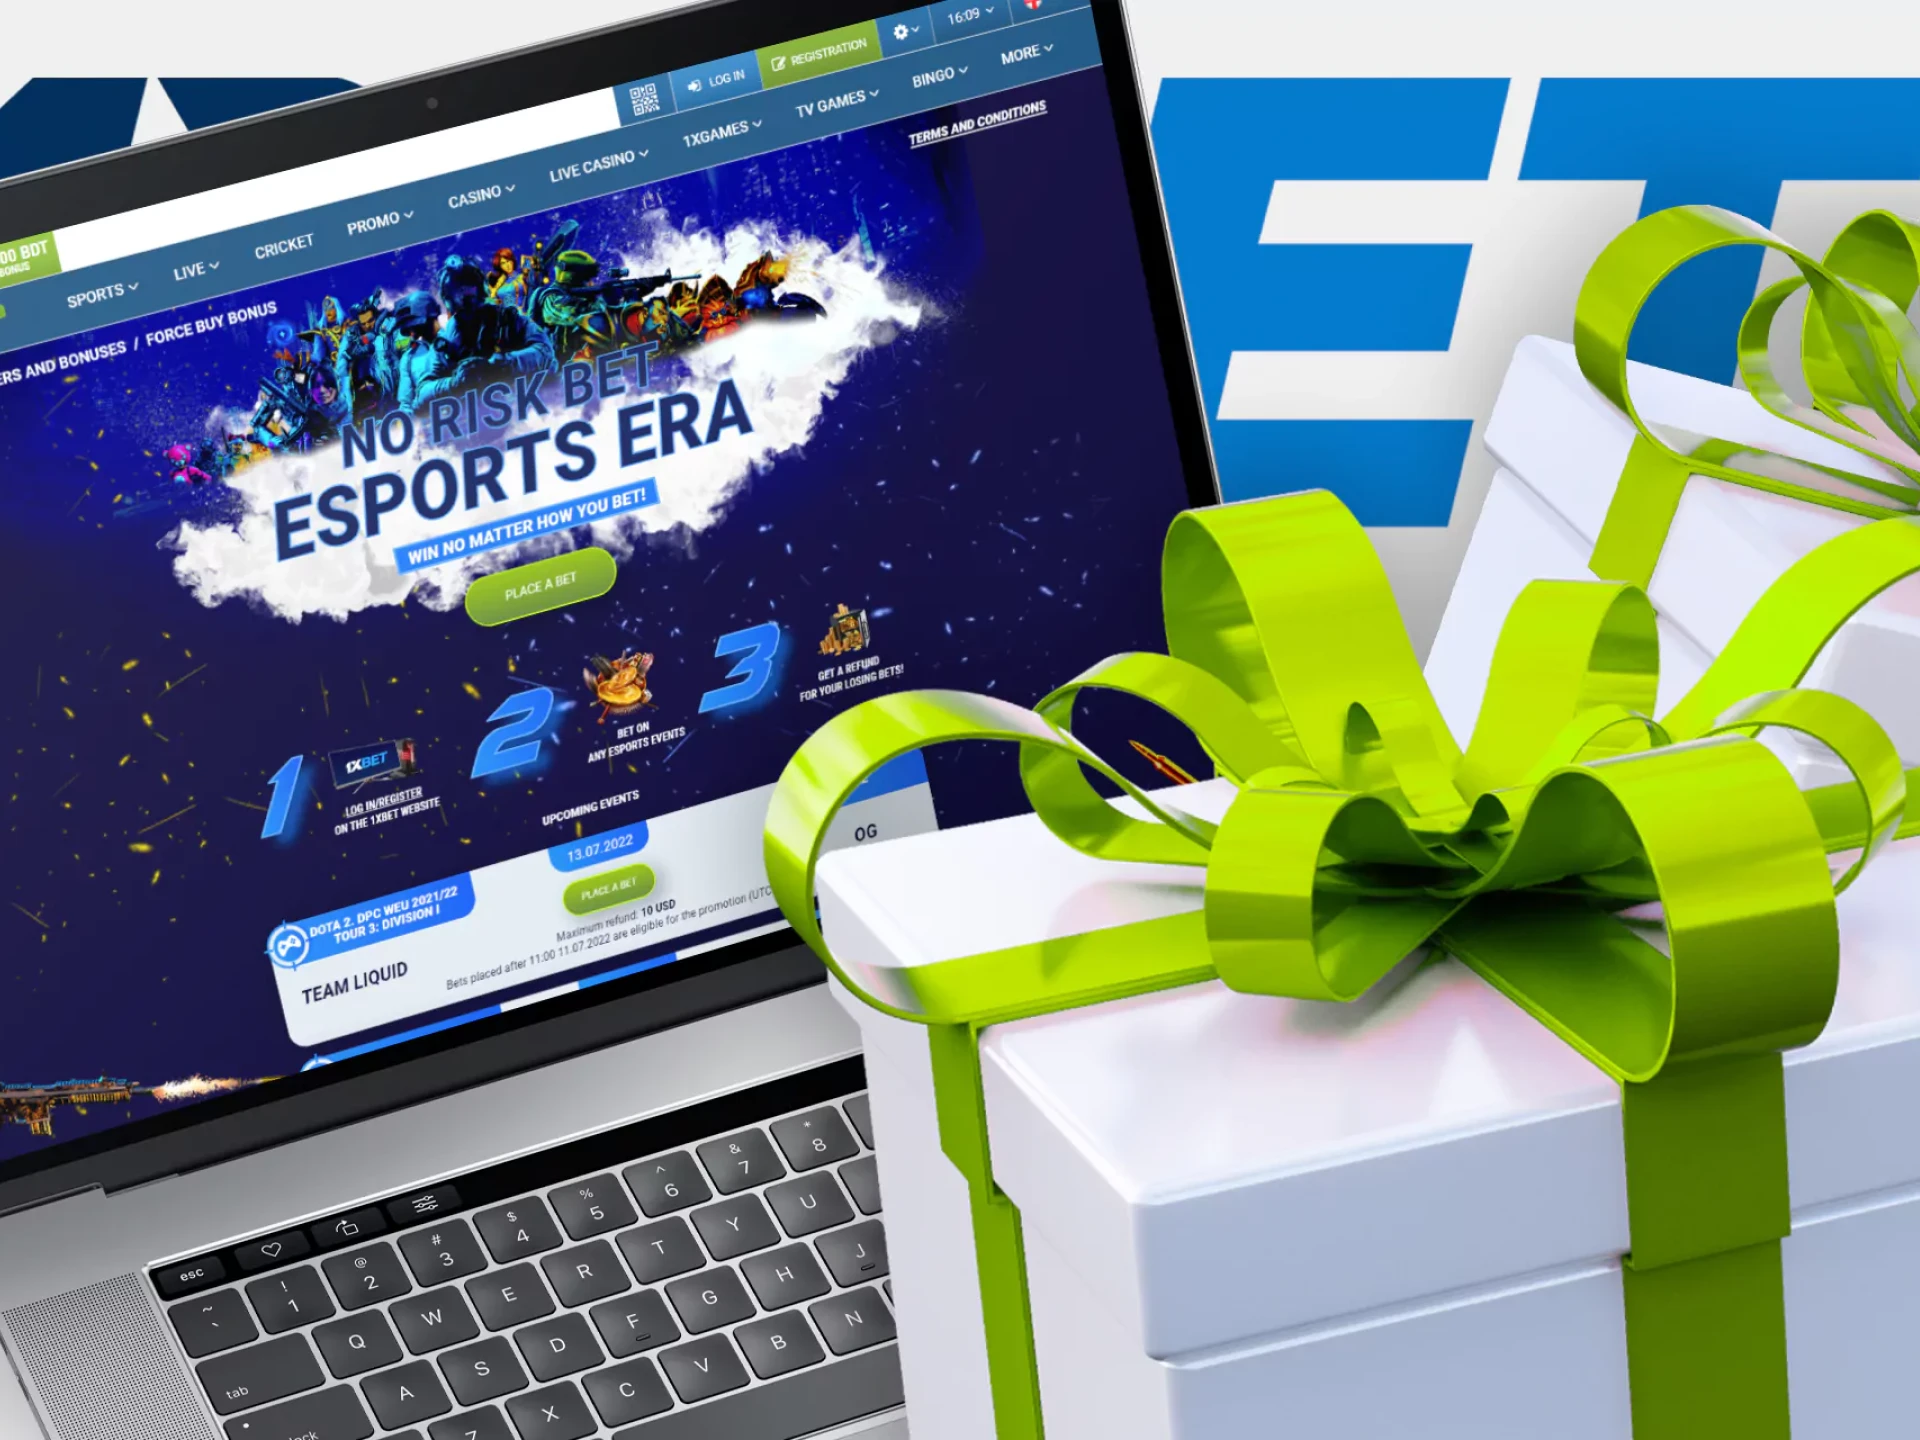 Esports fans have access to all the bonus programs for bettors.